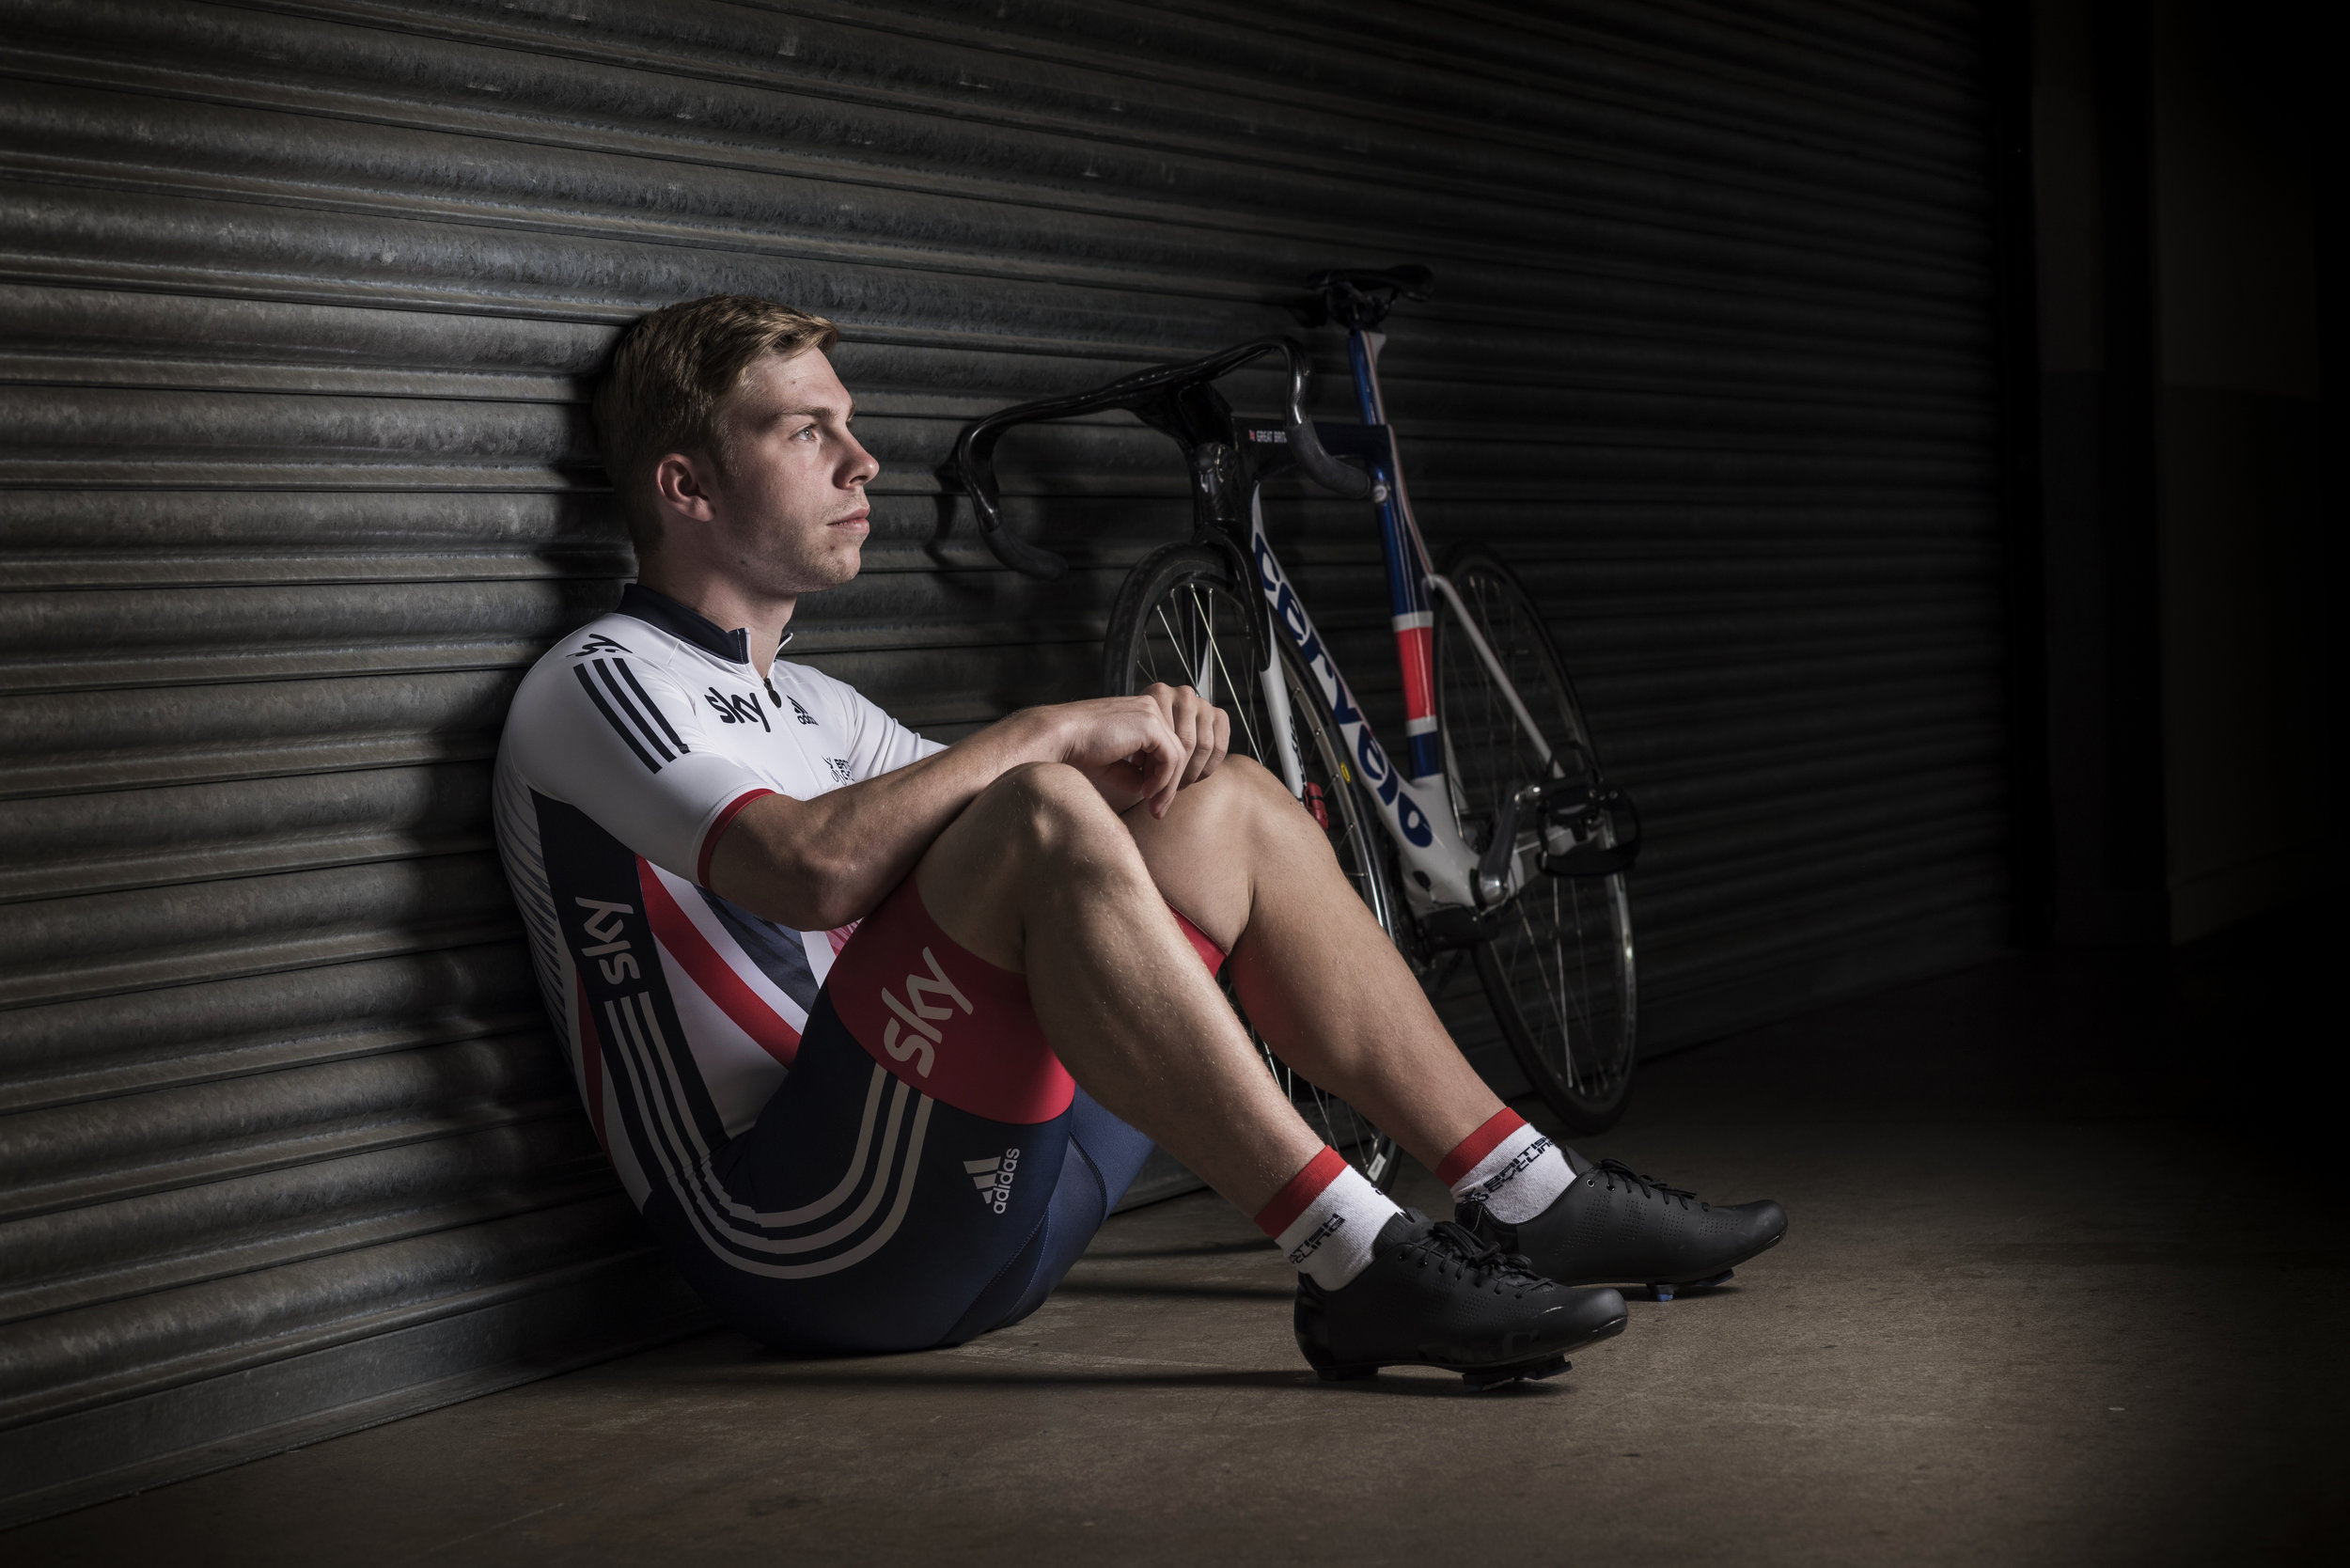  OLYMPIC CHAMPION TRACK CYCLIST PHILIP HINDES PHOTOGRAPHED AT NATIONAL CYCLING CENTER MANCHESTER 5TH JULY 2016 PHOTO CREDIT PAUL COOPER 